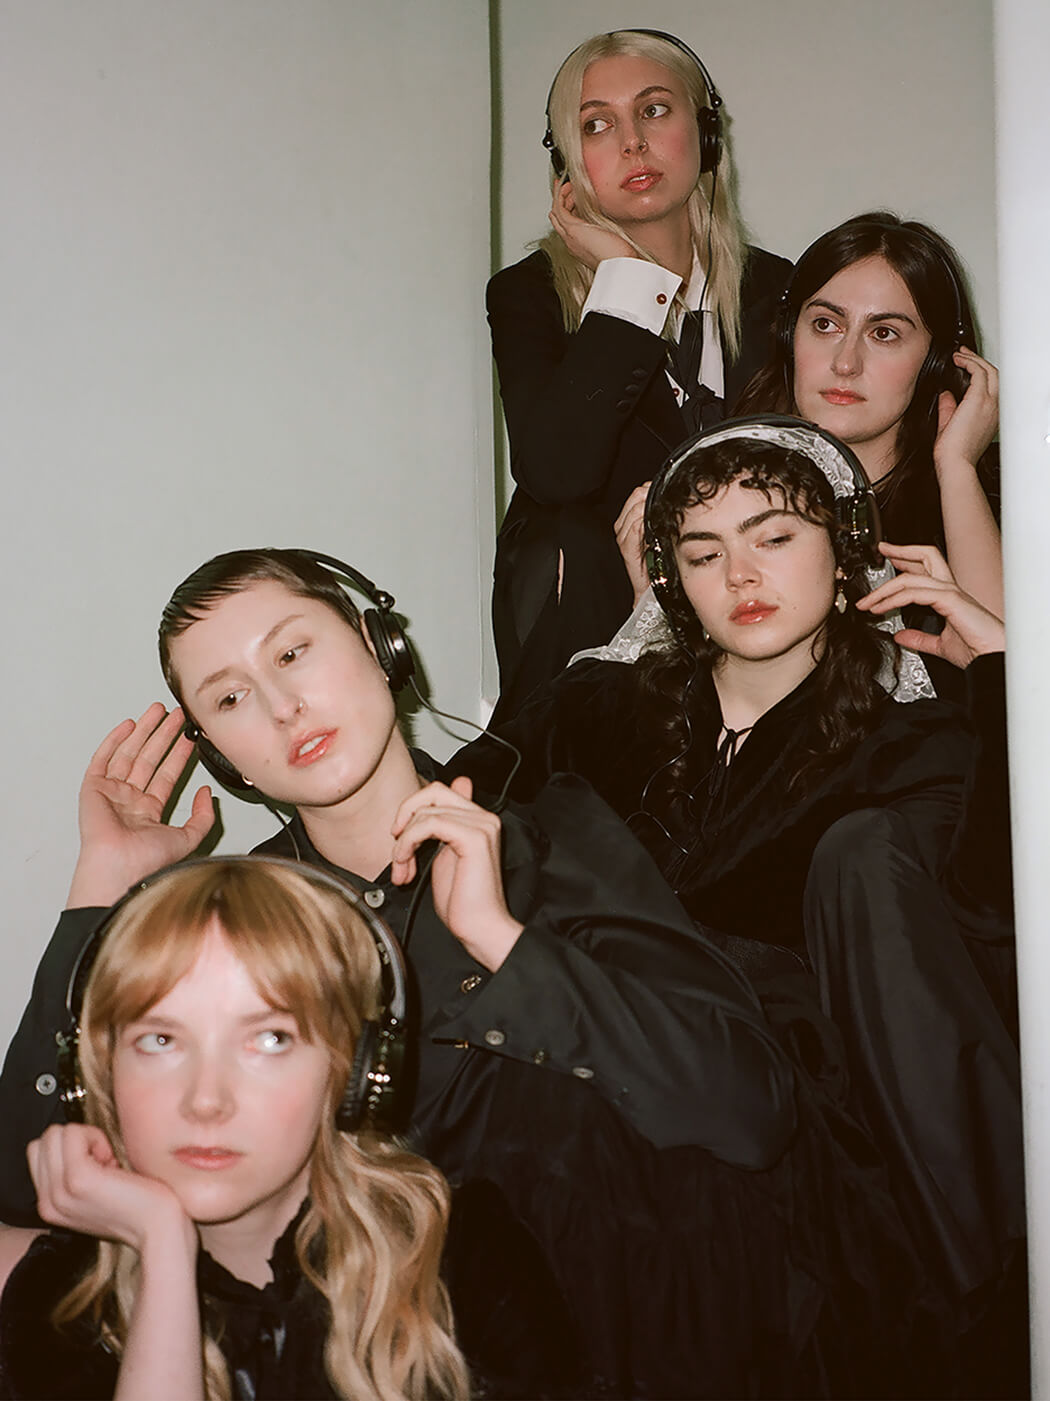 The Last Dinner Party photographed wearing headphones